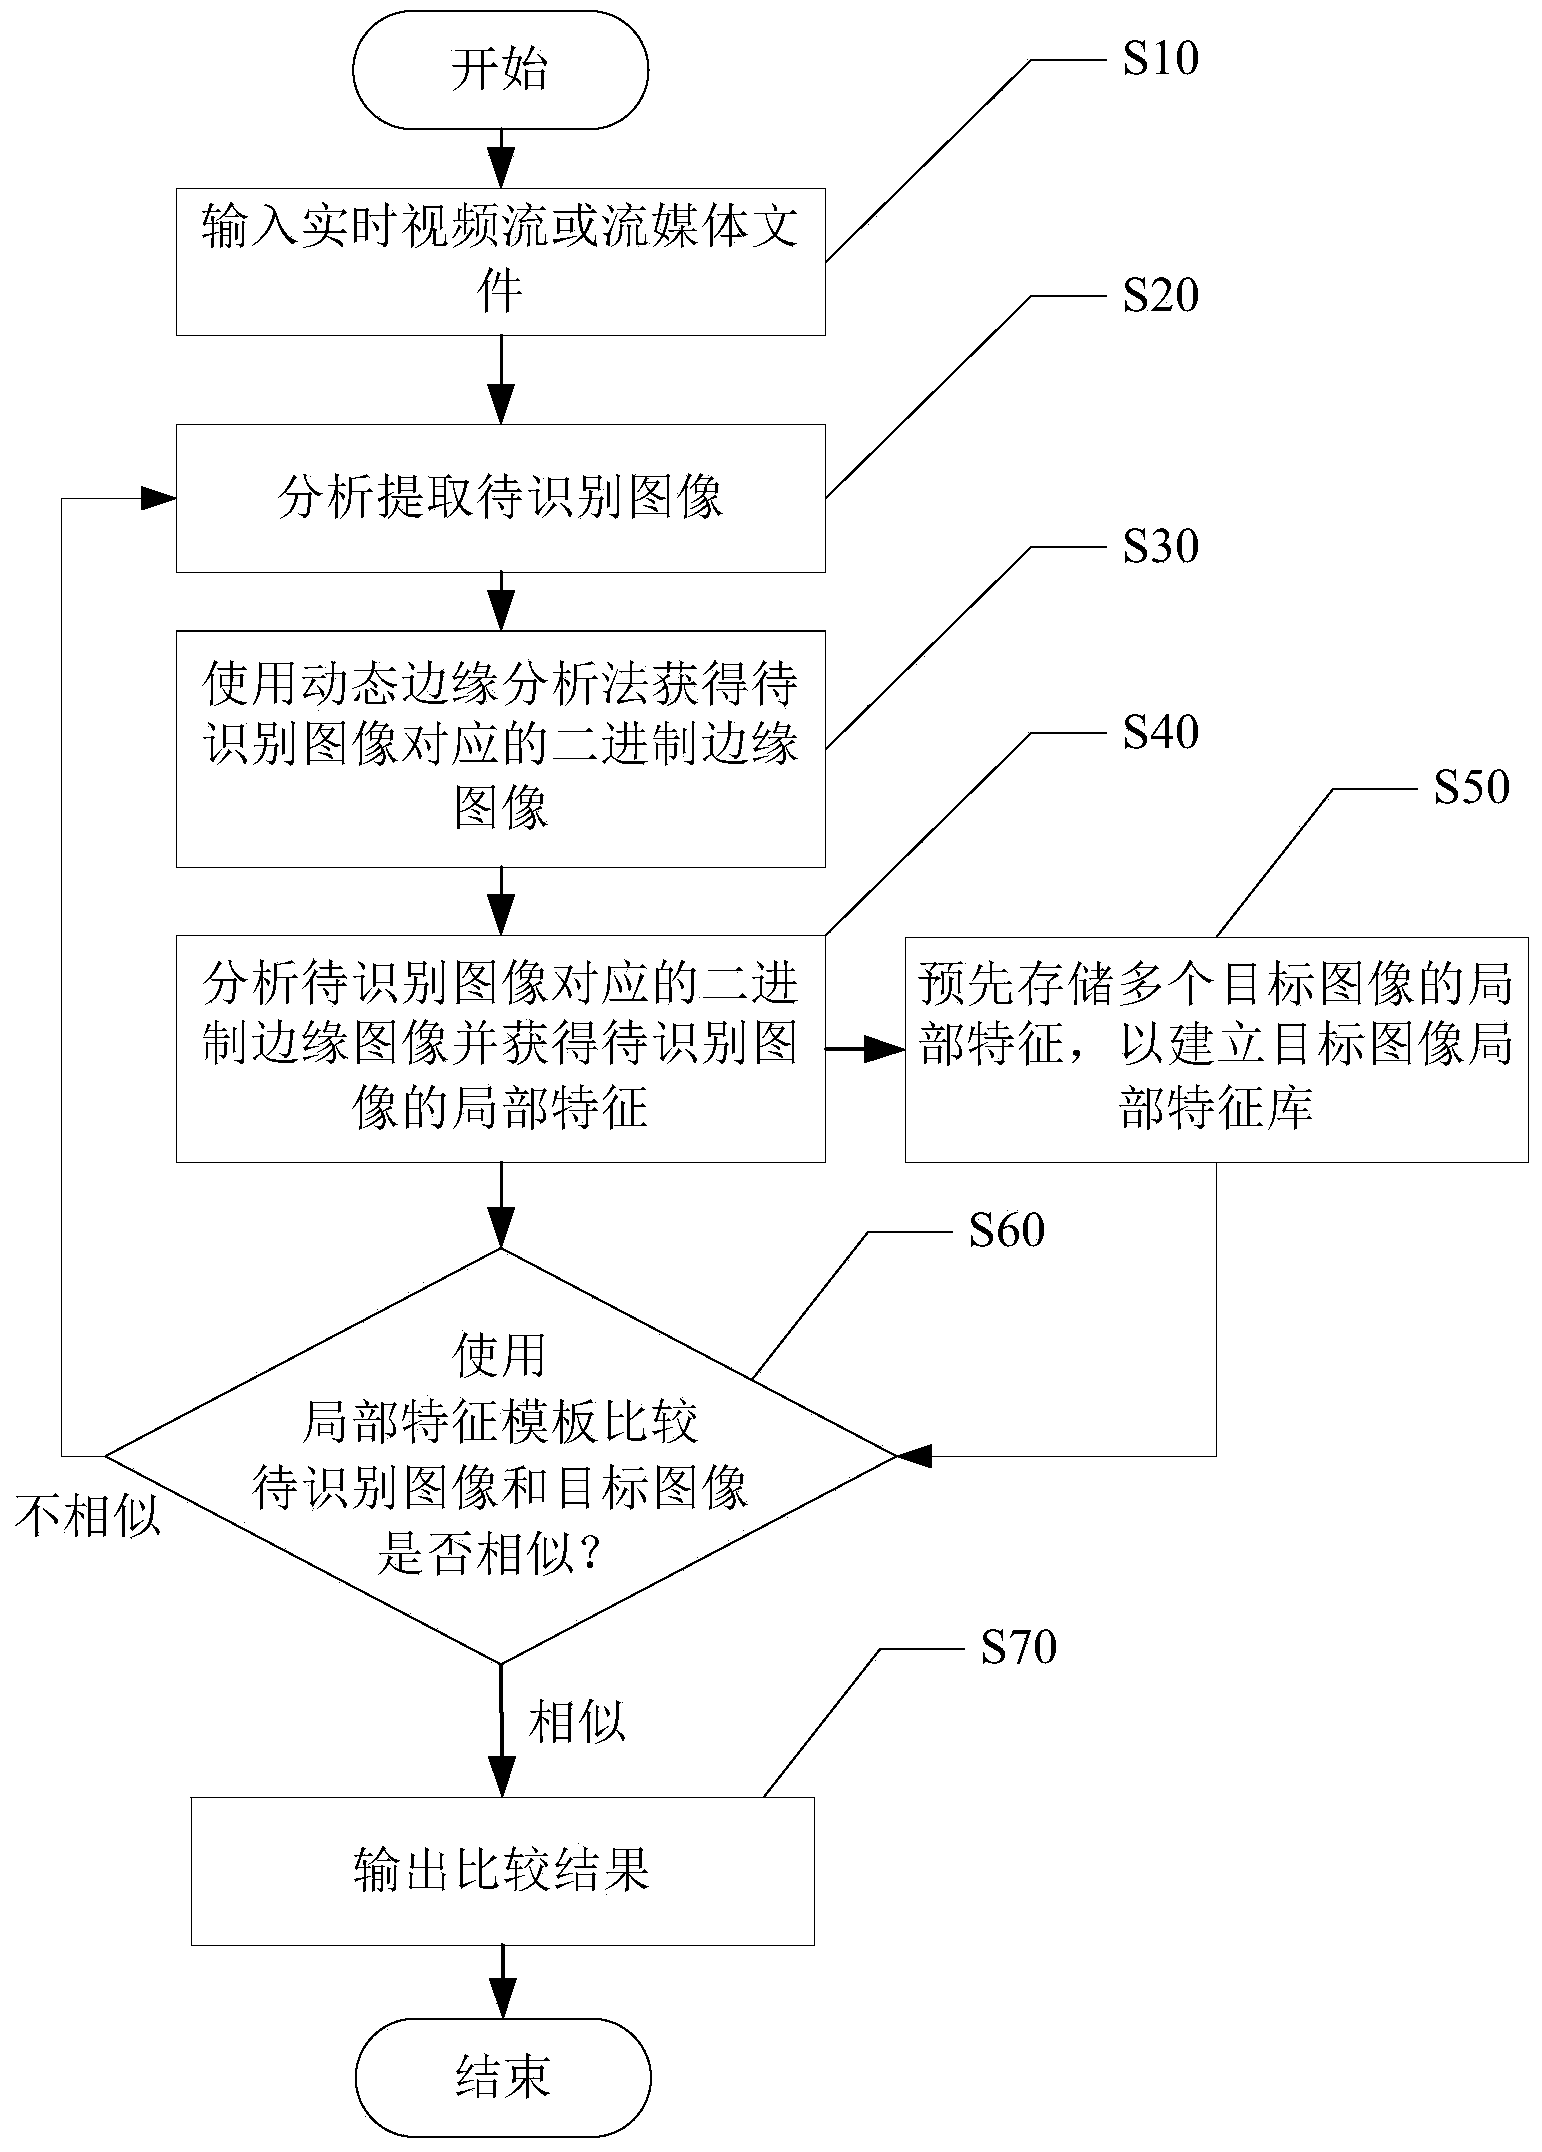 Image recognition system and method